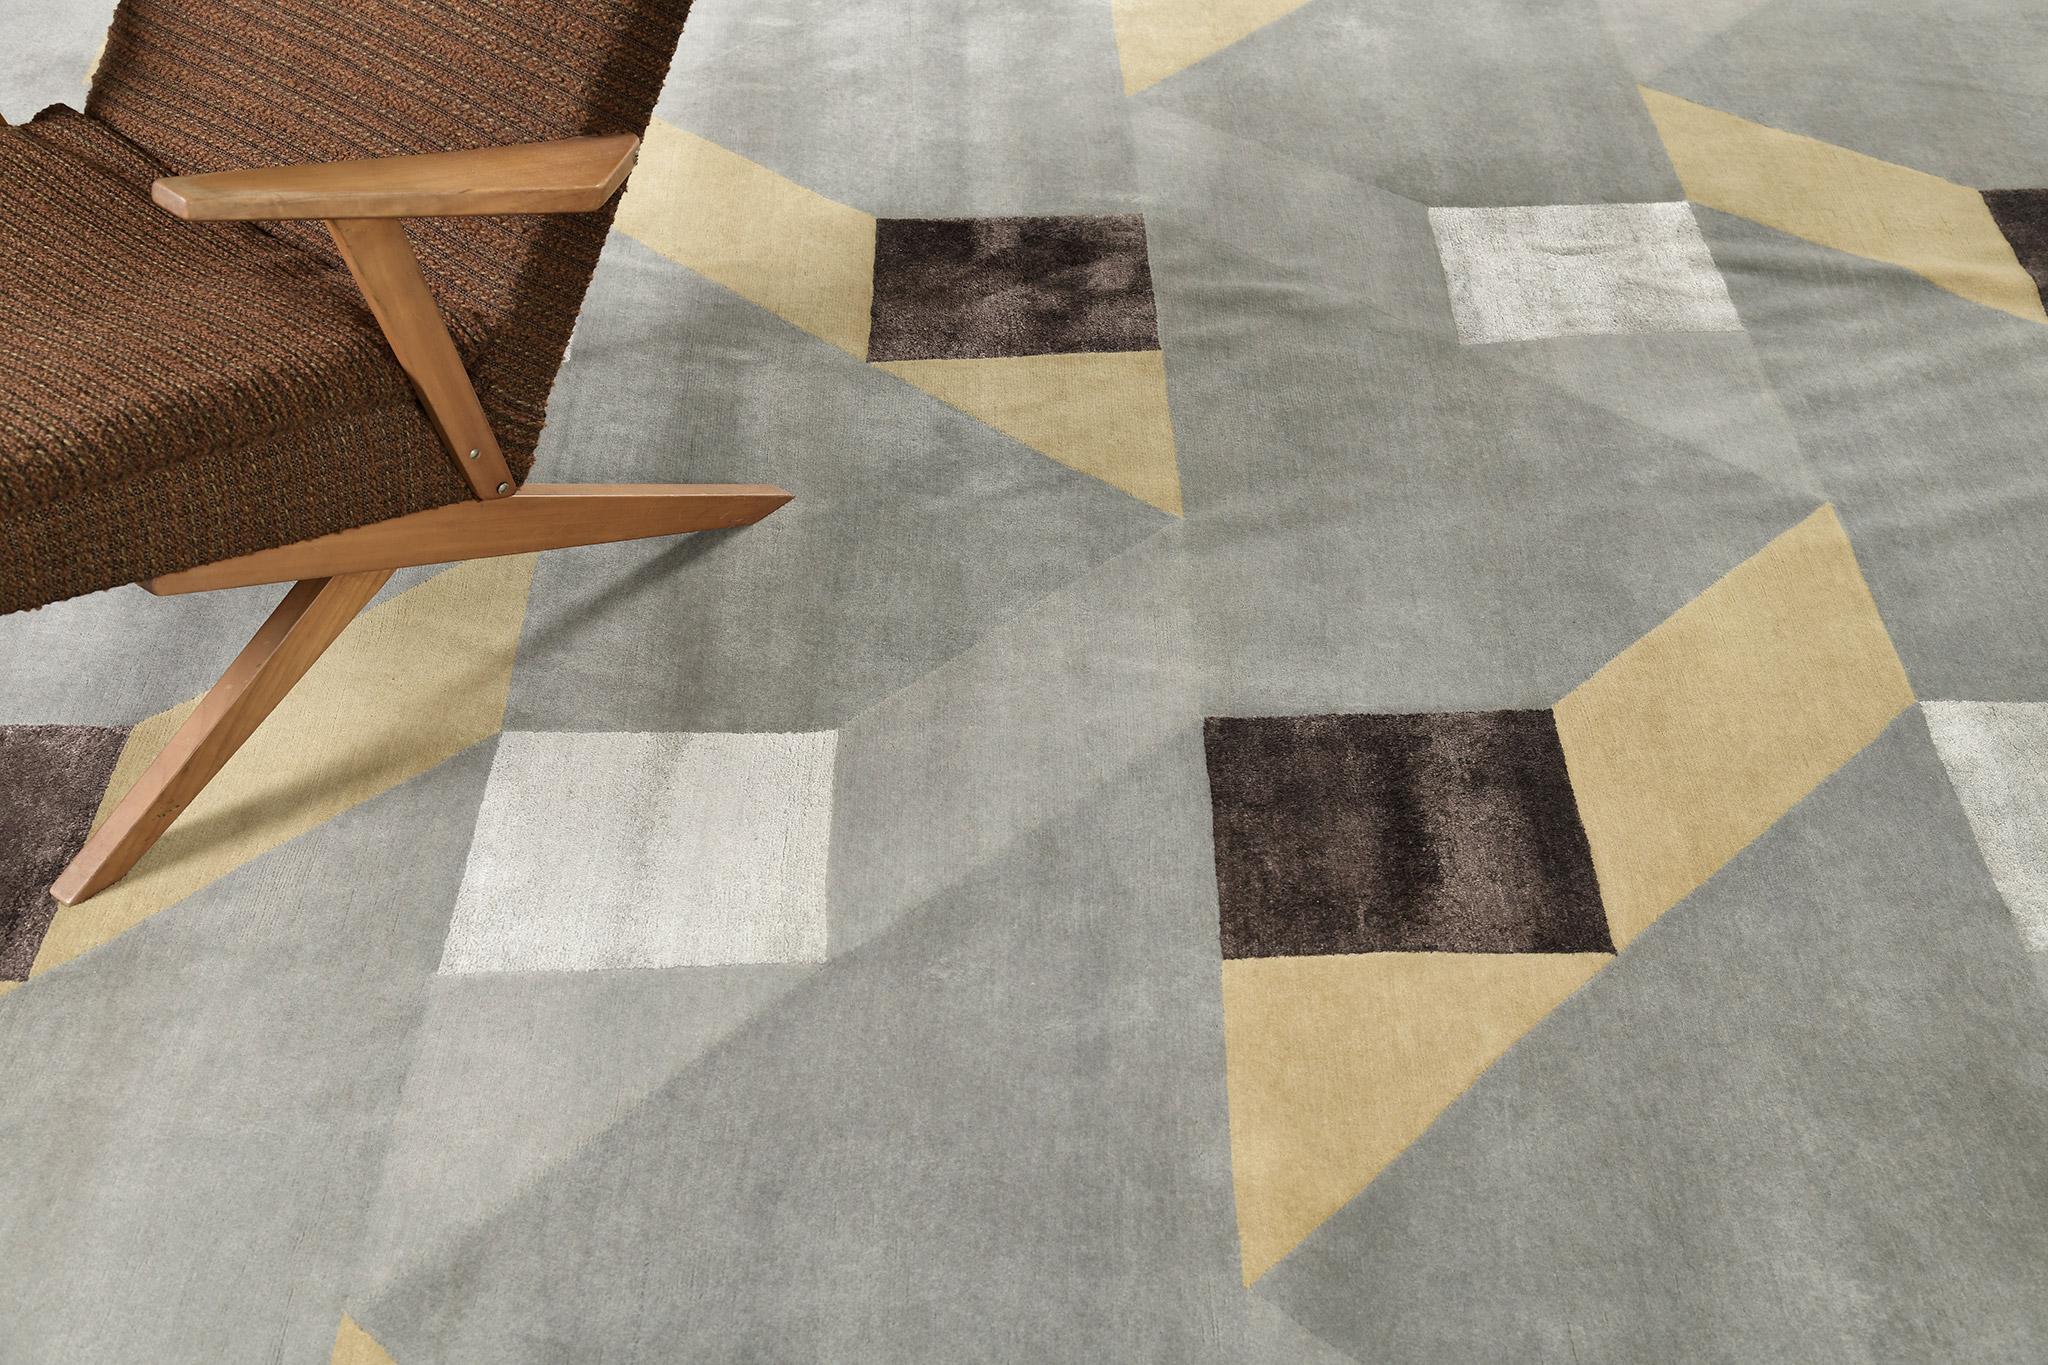 Ragione’ is made from elegant wool and silk. It is a part of the Design Rhymes Collection which pulls inspiration from different aspects of architecture. Featuring the kaleidoscopic effect from the geometrical and linear patterns, this rug brings